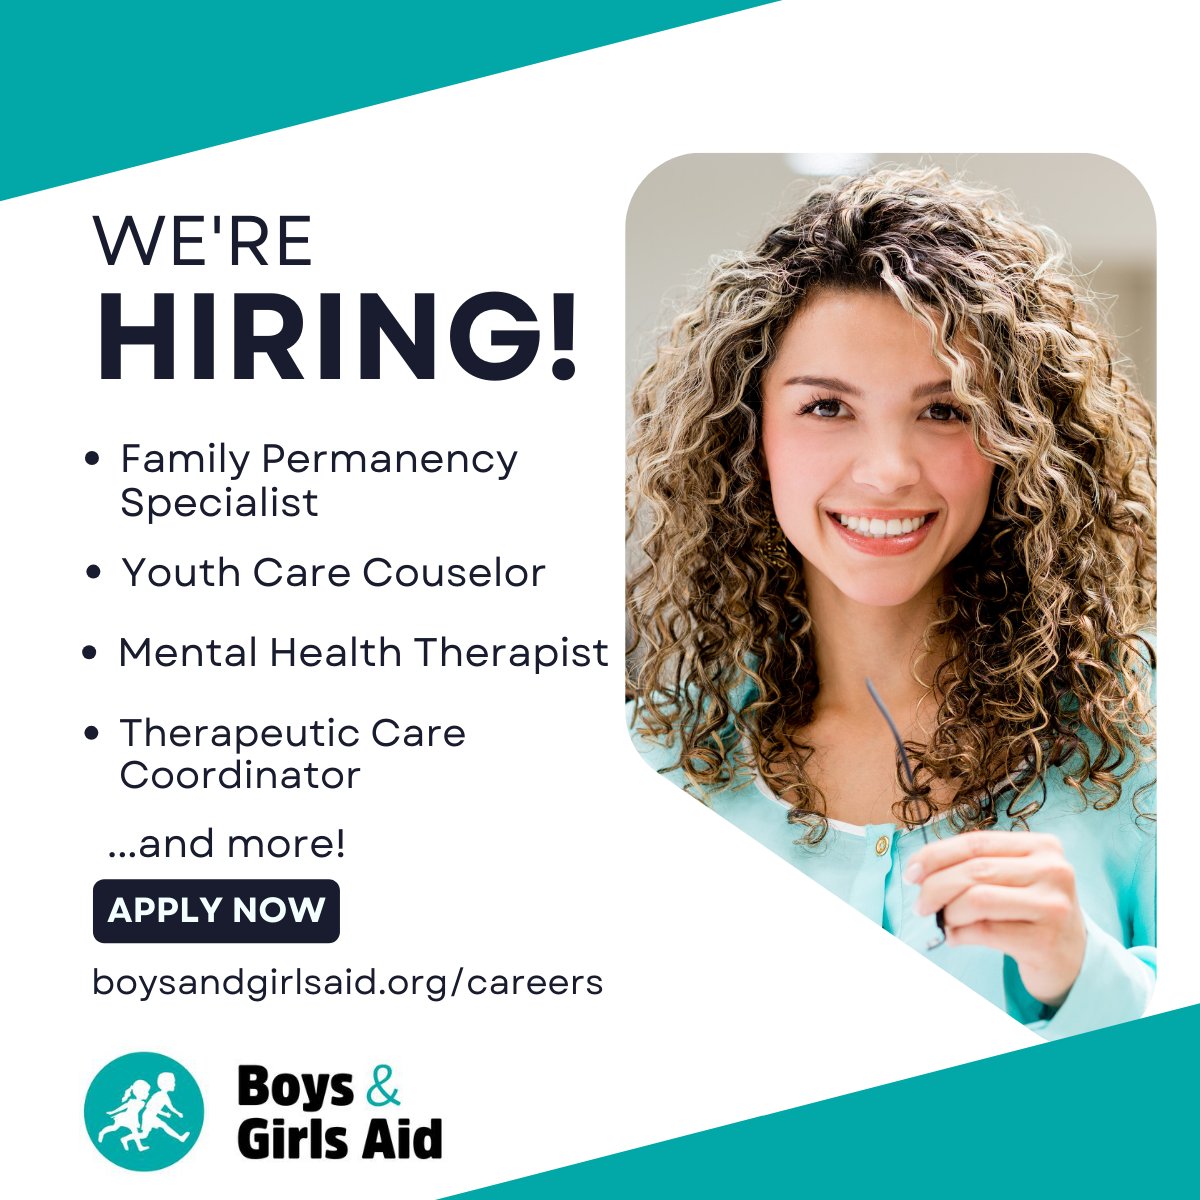 Looking for a meaningful career? Right now, we're hiring for positions in our foster care, permanency, and shelter programs. Learn more and apply at bit.ly/3SvrtII. #BGAid #FosterLove #ItsAllAboutFamily #Hiring #NowHiring #NonprofitJobs #PortlandJobs #OregonJobs